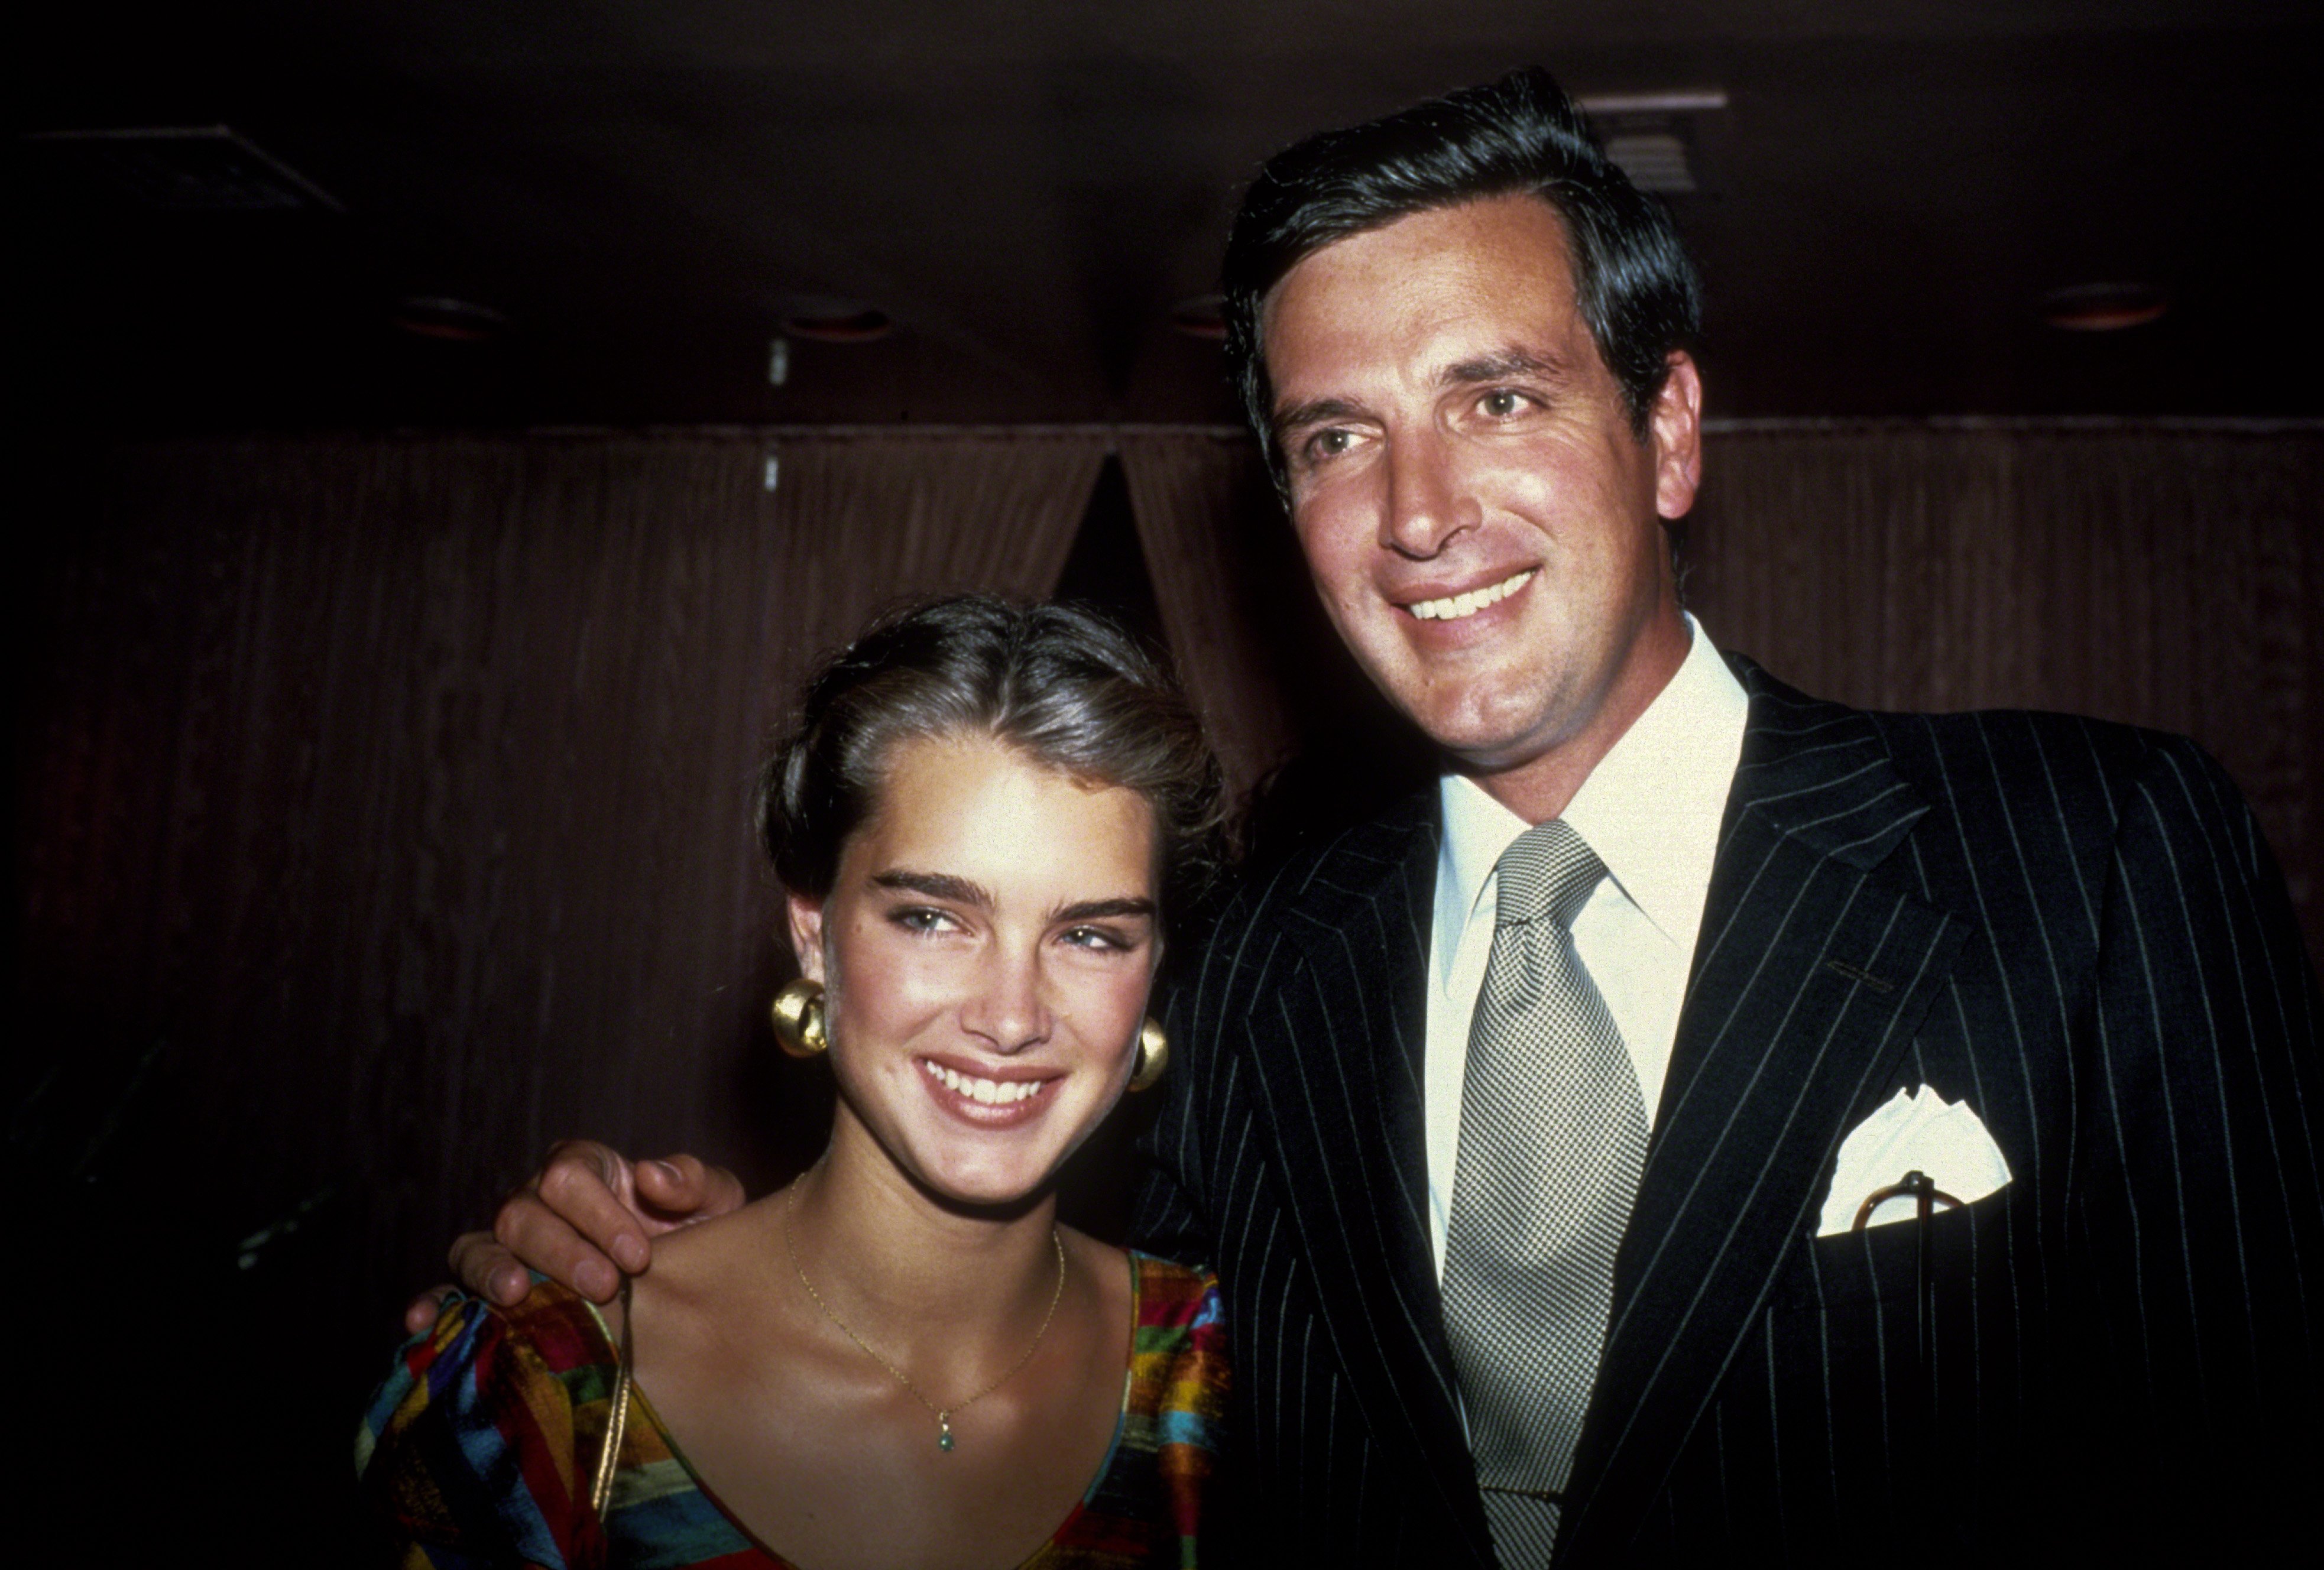 Brooke Shields and her father, Francis Alexander Shields Jr. at an event in 1981, in New York City. | Source: Getty Images